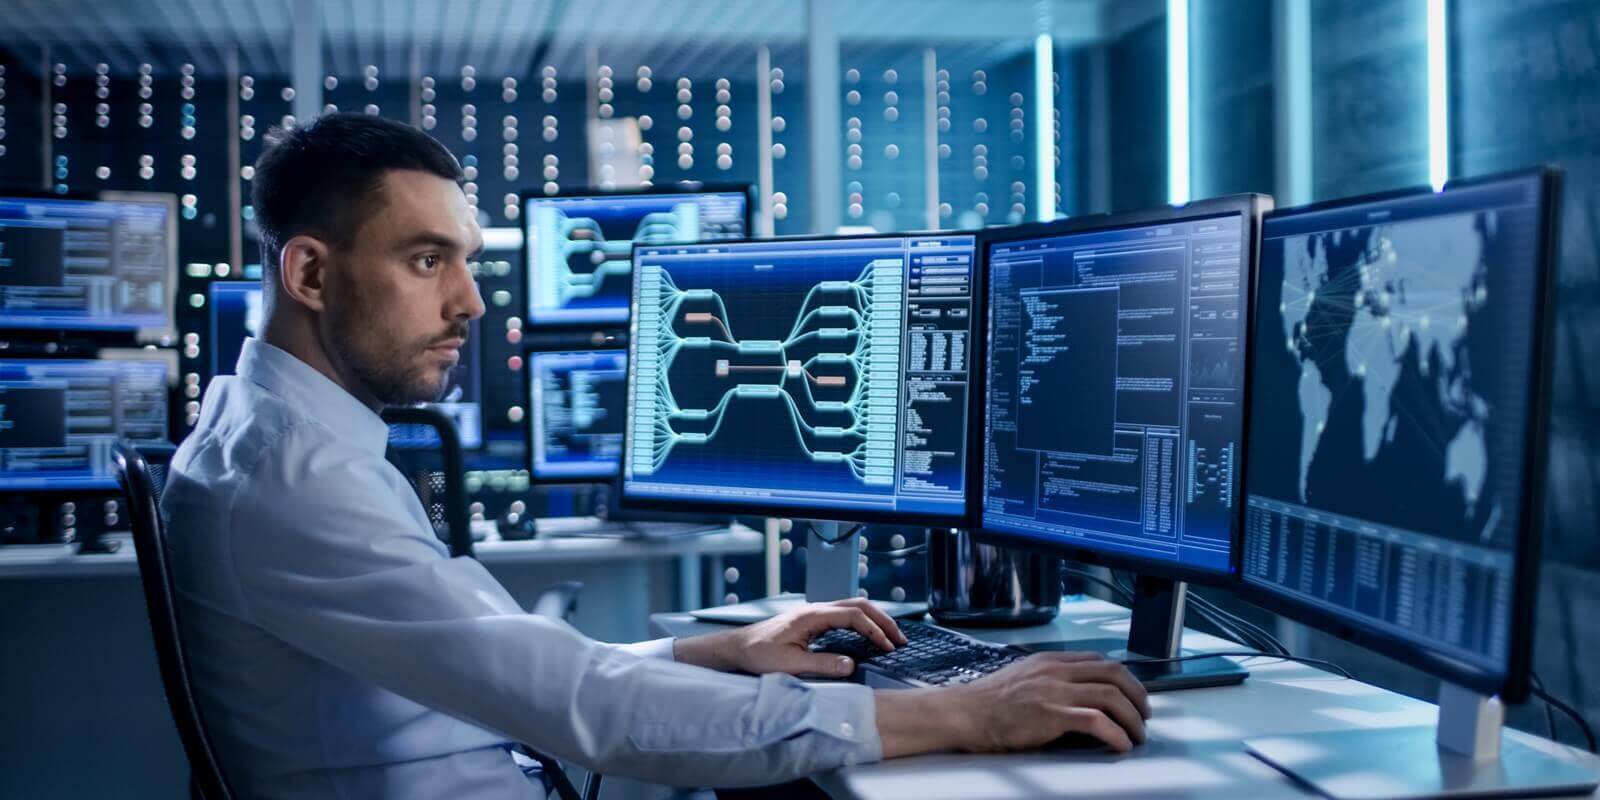 system security specialist working at system control center